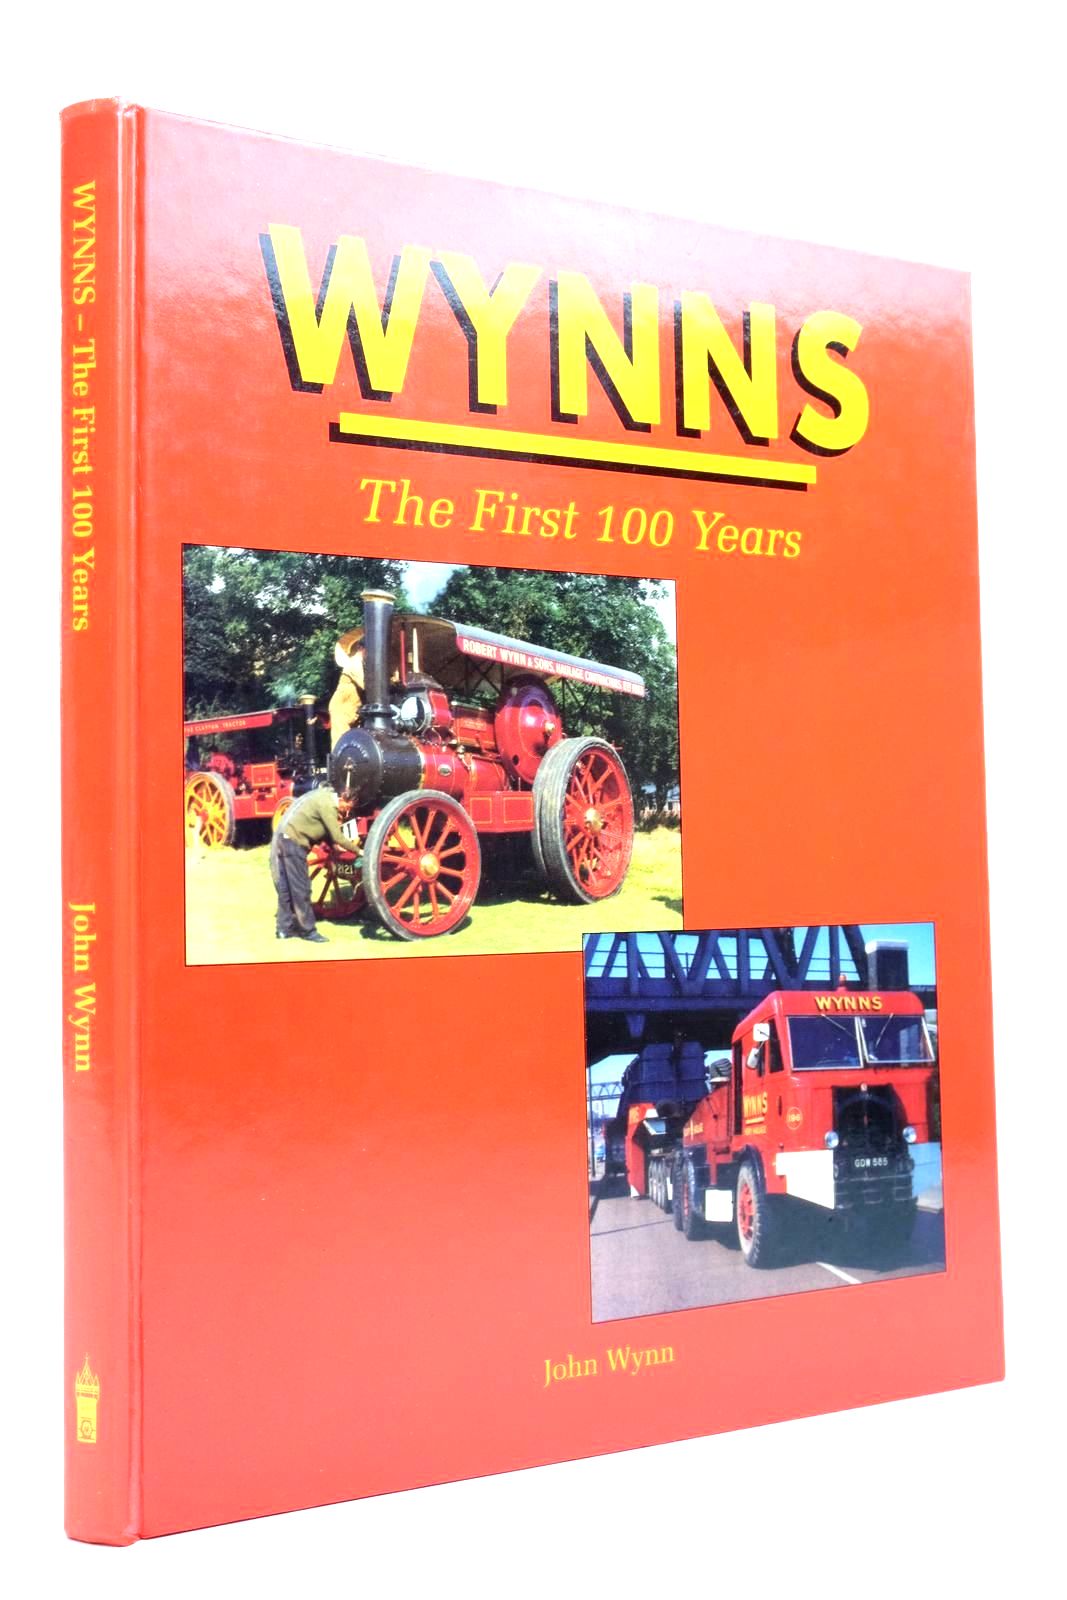 Photo of WYNNS THE FIRST 100 YEARS written by Wynn, John published by P.M. Heaton Publishing (STOCK CODE: 2139291)  for sale by Stella & Rose's Books